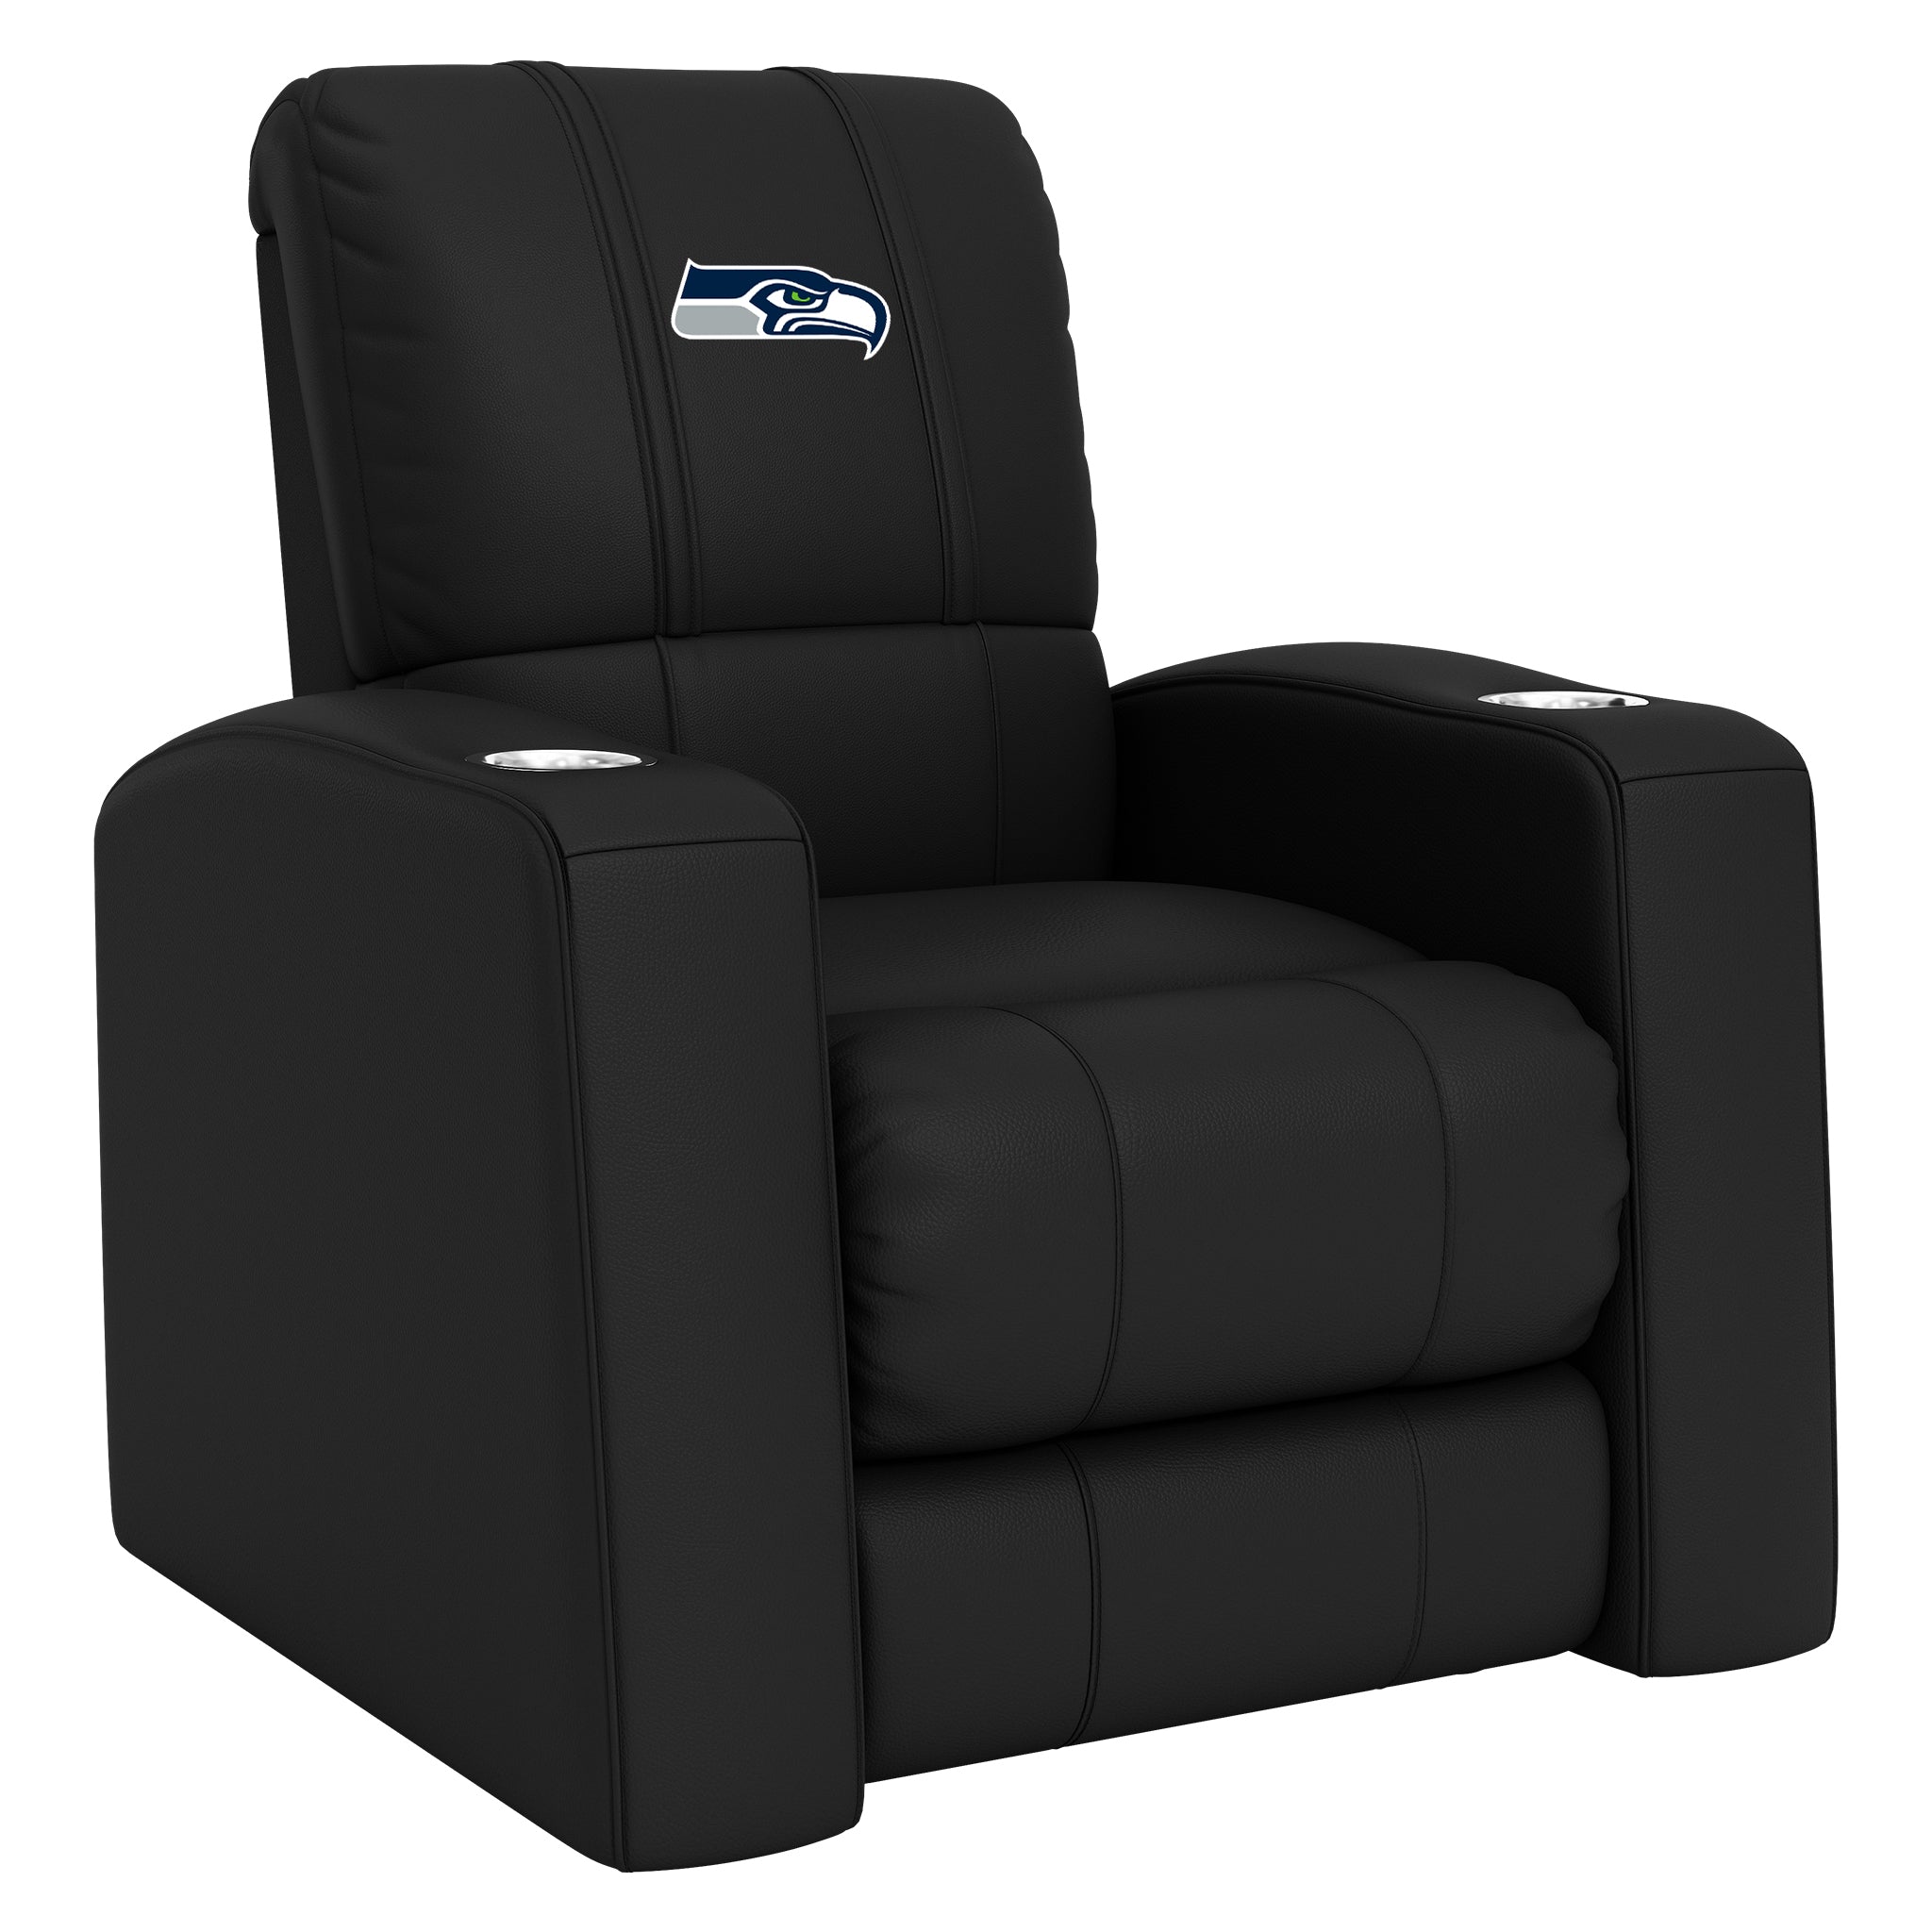 Seattle Seahawks Home Theater Recliner